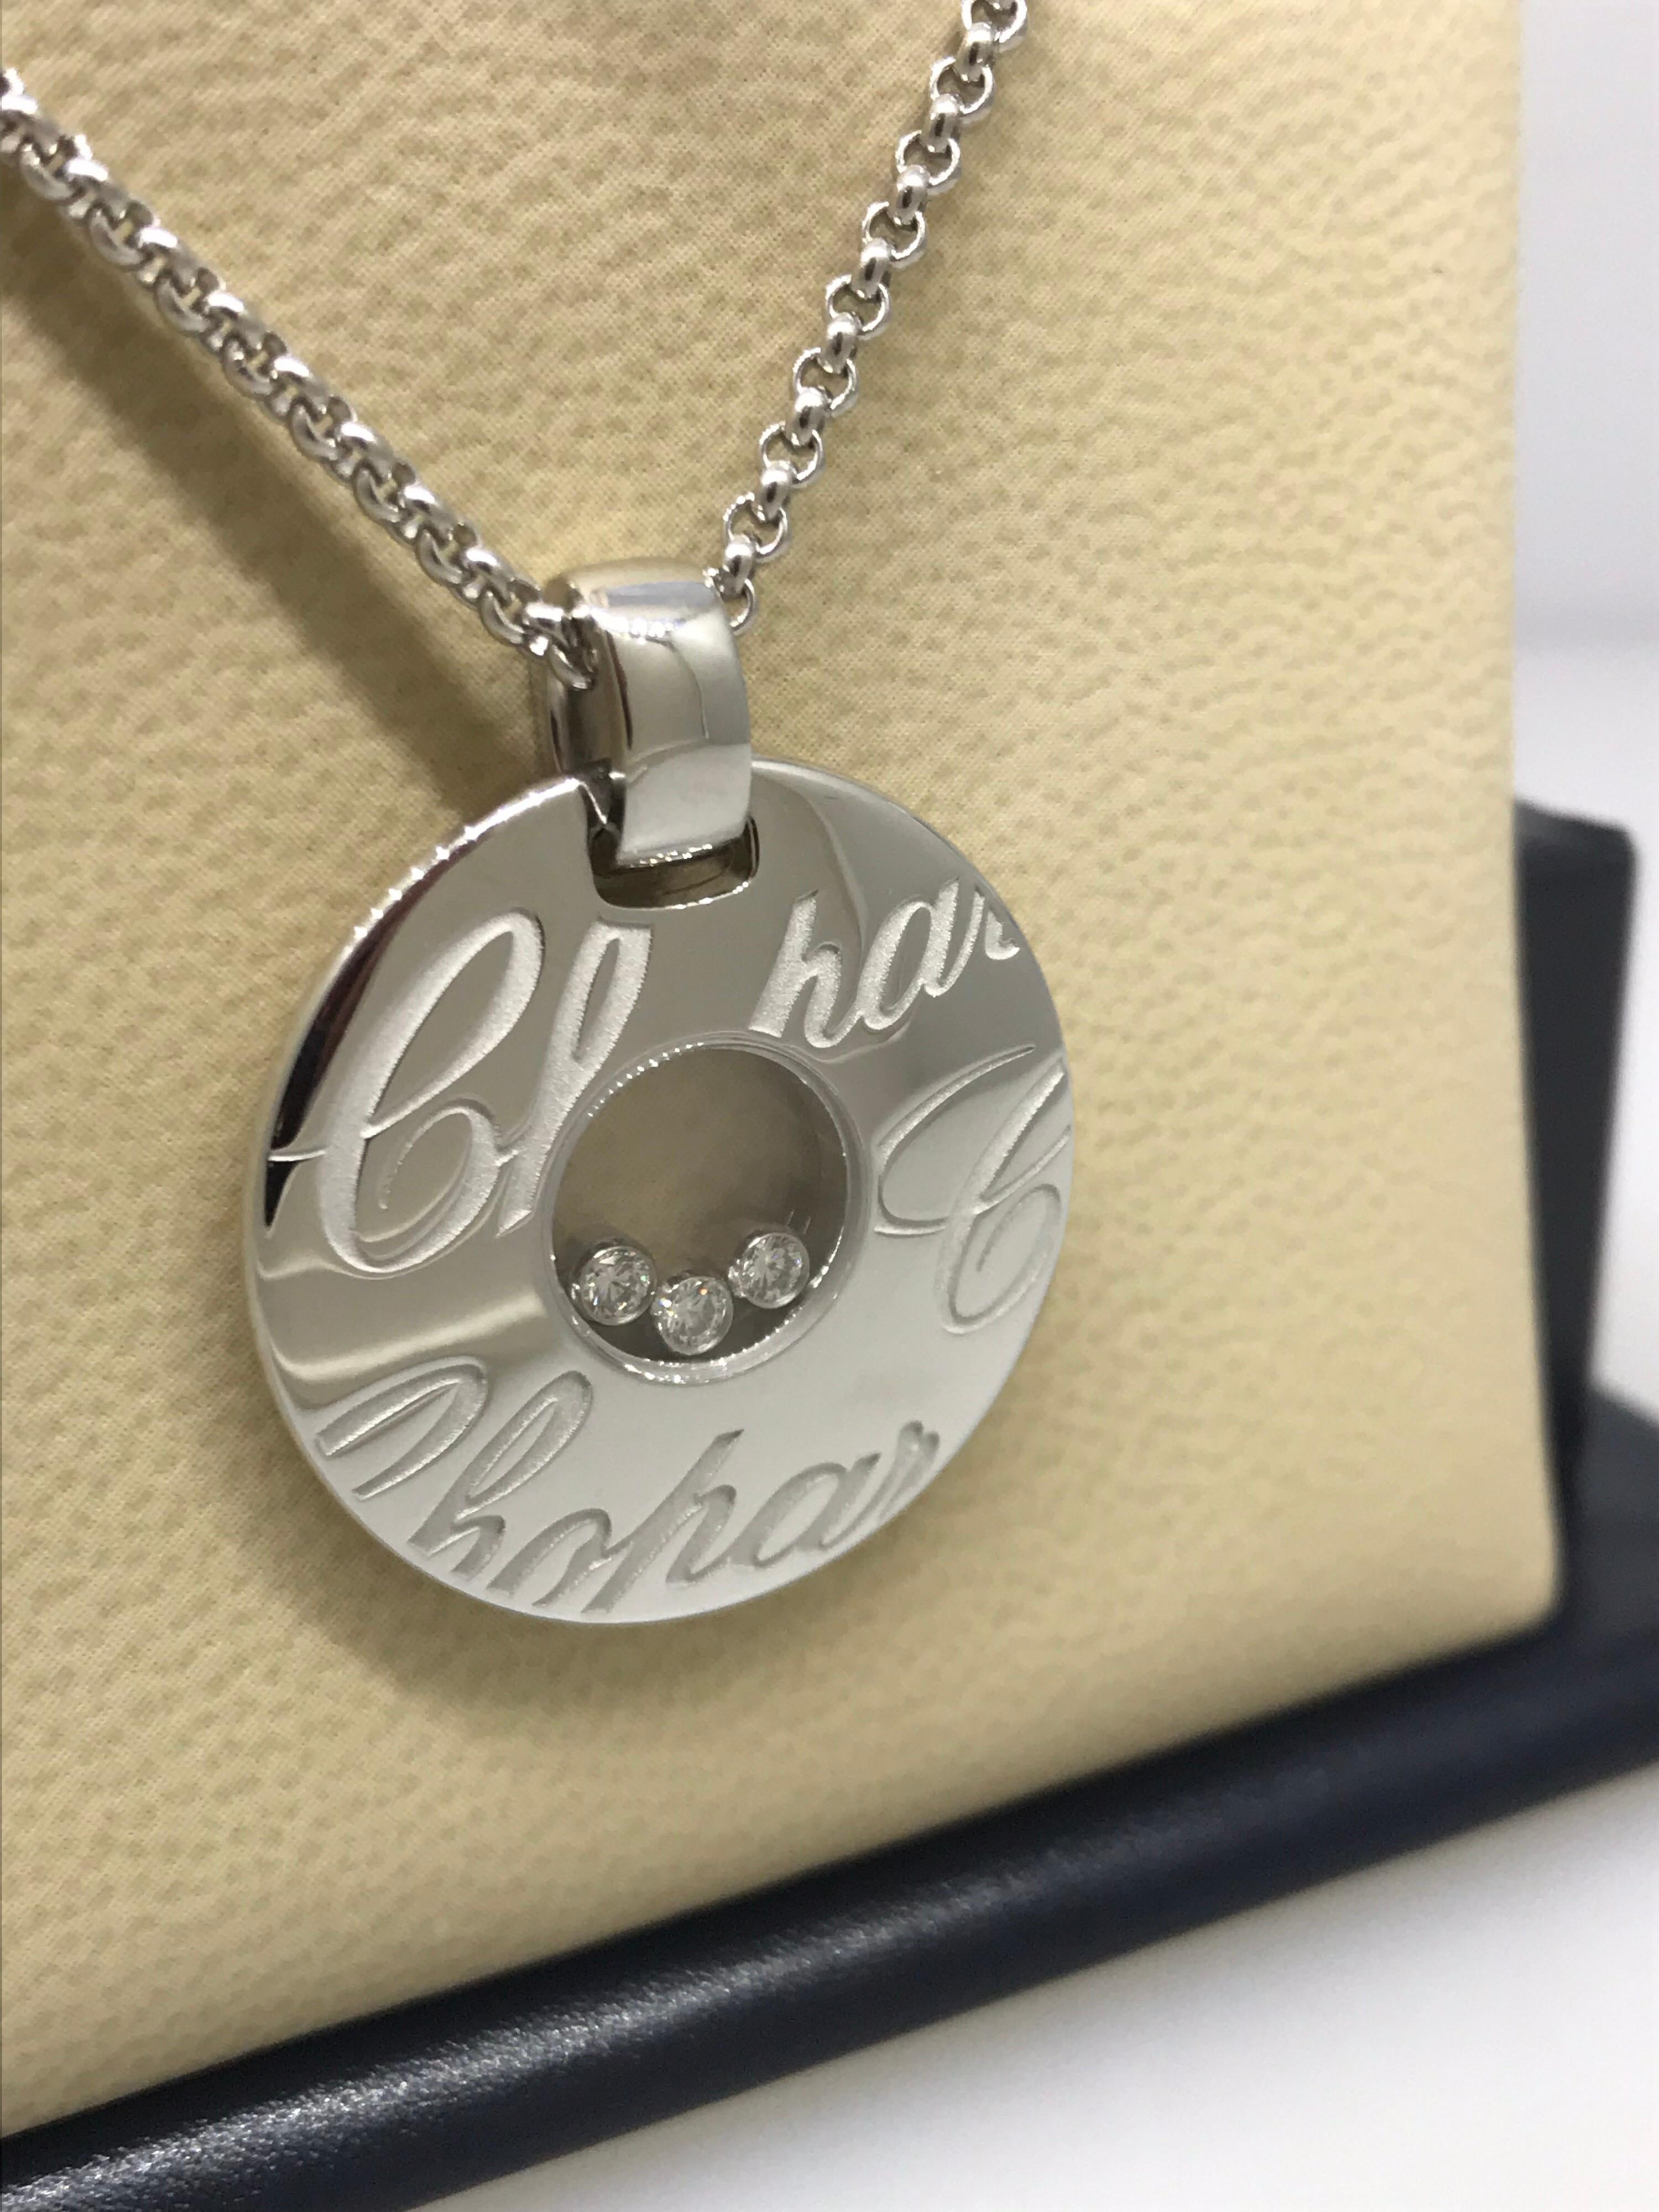 Chopard Chopardissimo Pendant Necklace

Model Number 79/7759-1001

100% Authentic

Brand New

Comes with original Chopard box, certificate of authenticity and warranty and jewels manual

18 Karat White Gold

3 Floating Diamonds (.17 Carats)

Pendant